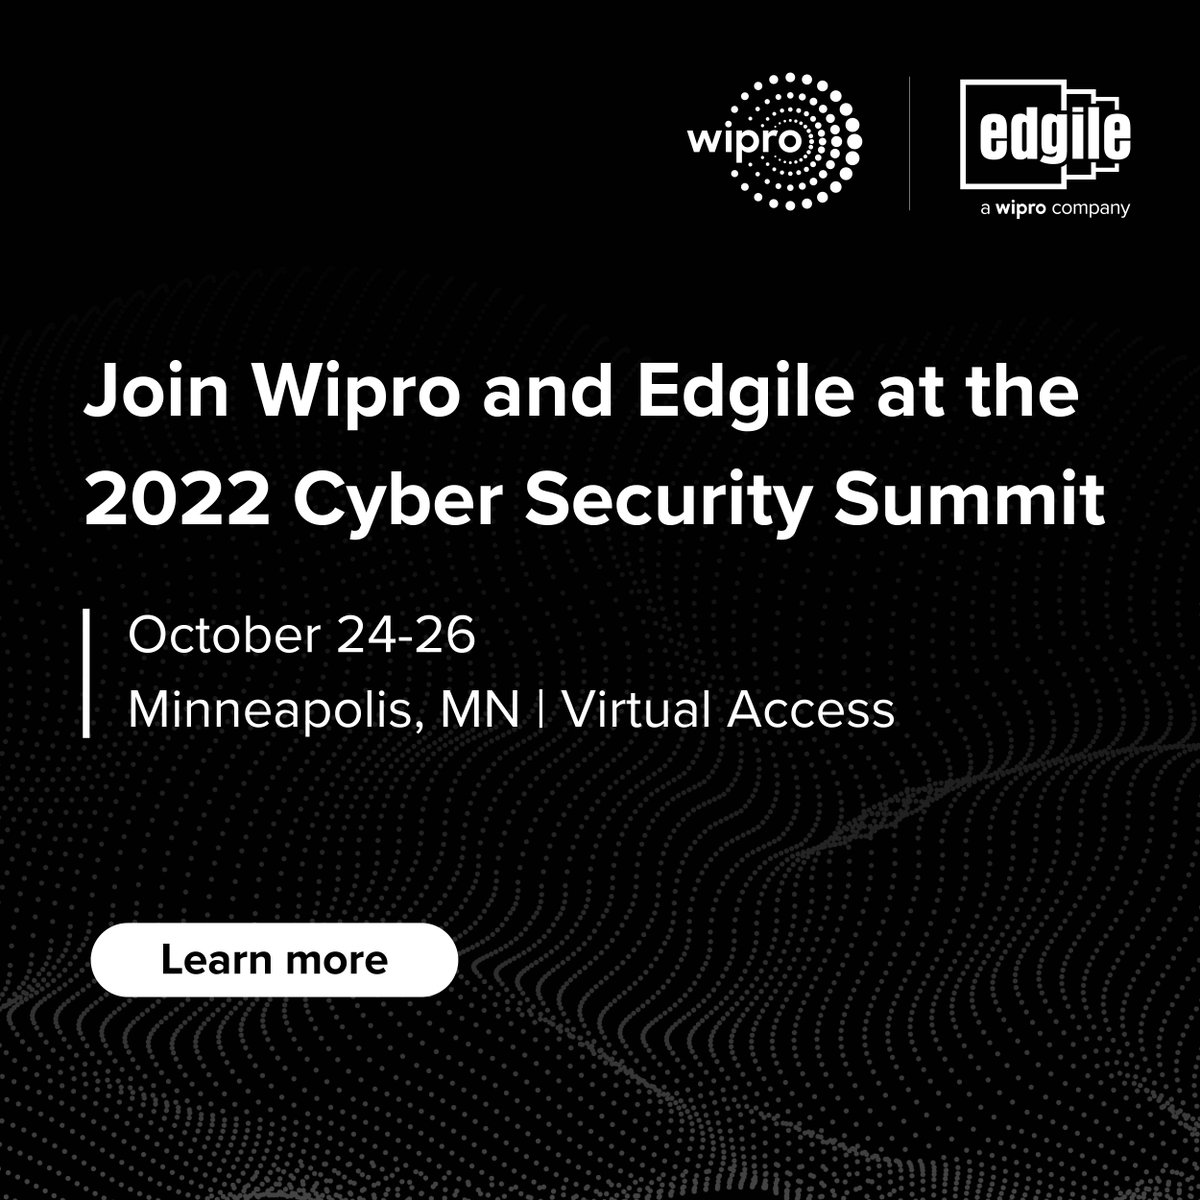 Join Wipro and @ThisIsEdgile at the 2022 #CyberSecuritySummit, where we'll be showcasing industry-leading cyber and risk solutions, and our strategic approach to starting, rebooting, and extending cybersecurity programs. Learn more: bit.ly/3eRV6FO